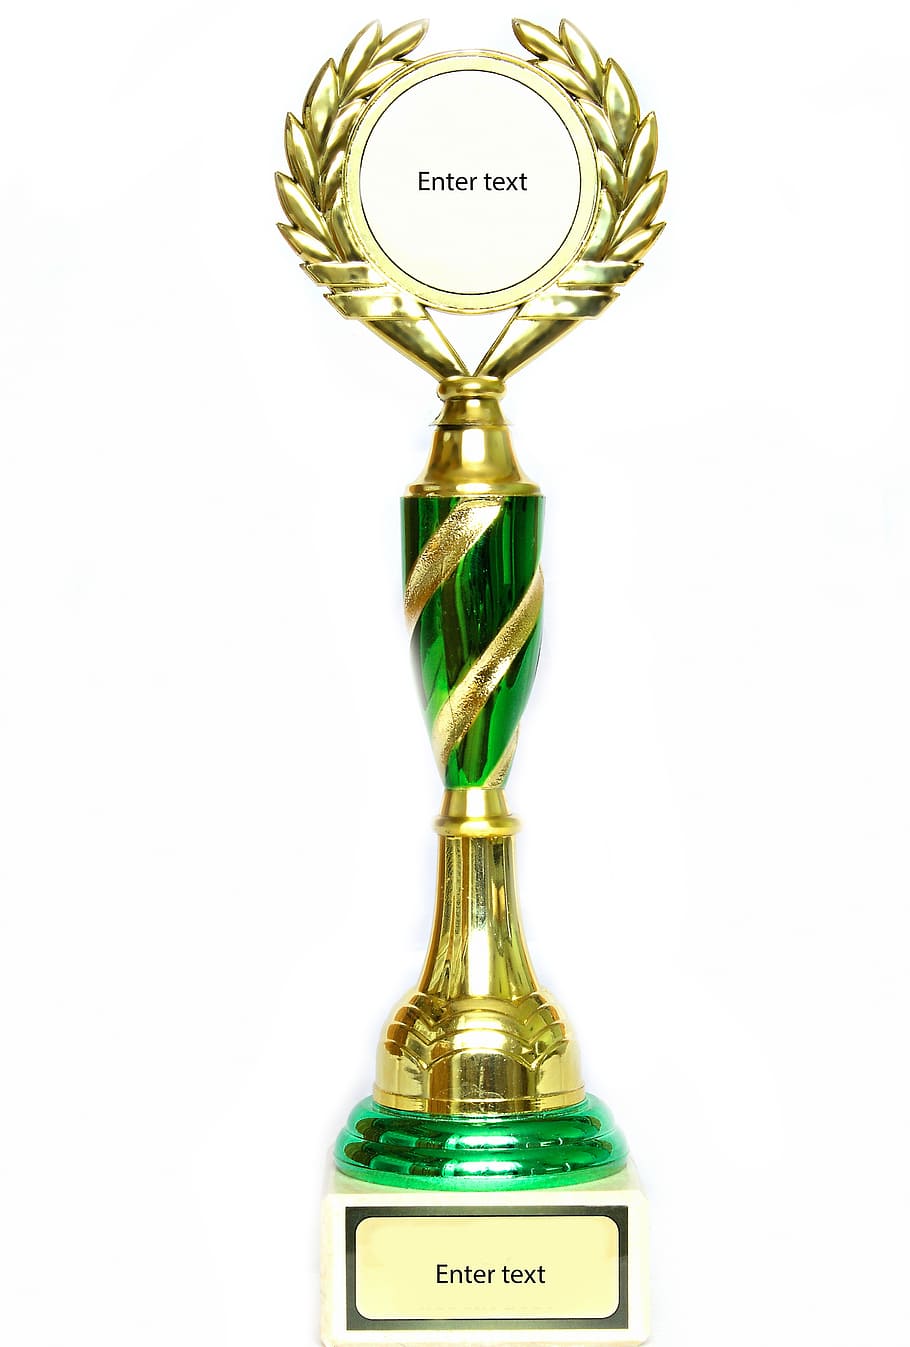 gold-colored and green trophy, cup, winner, enter, champions